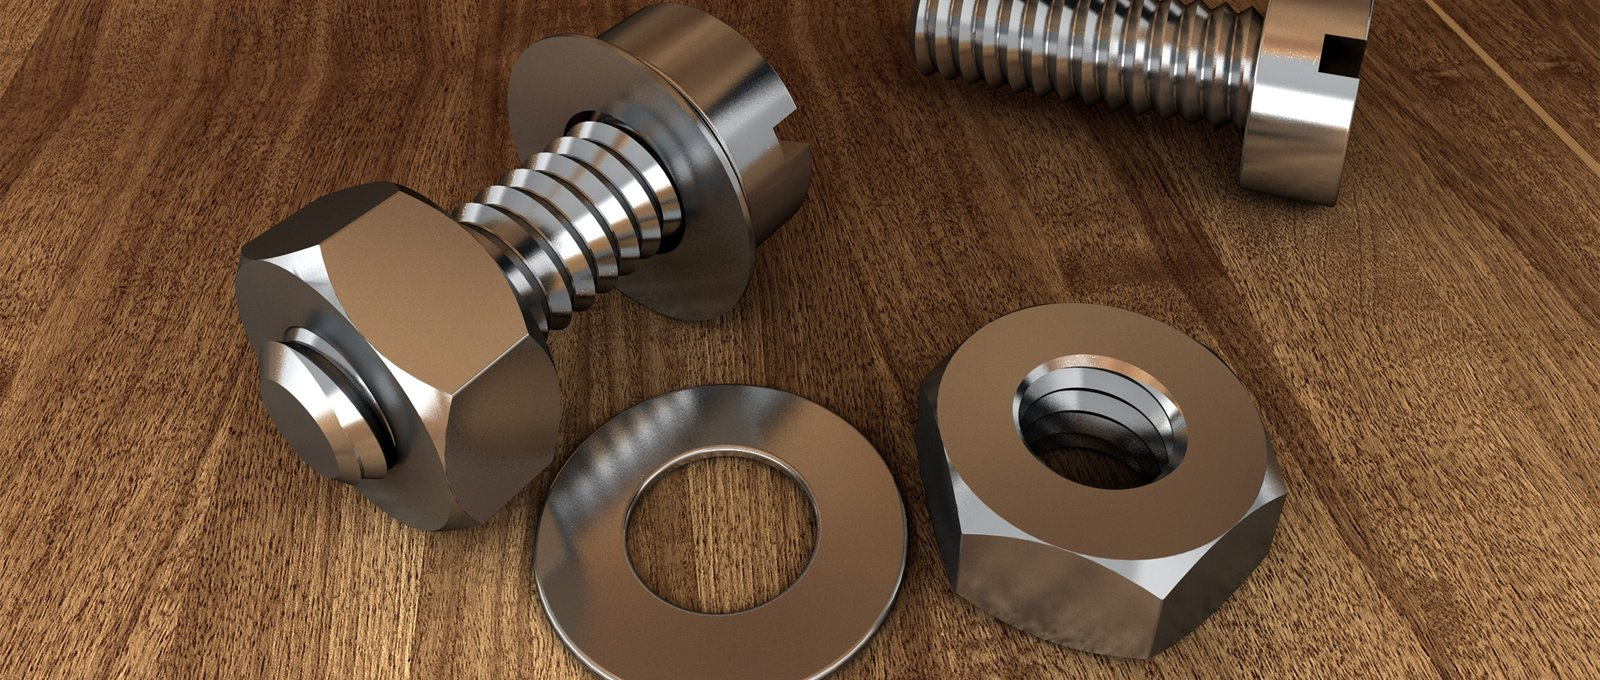 Close-up photograph of metal nuts and bolts